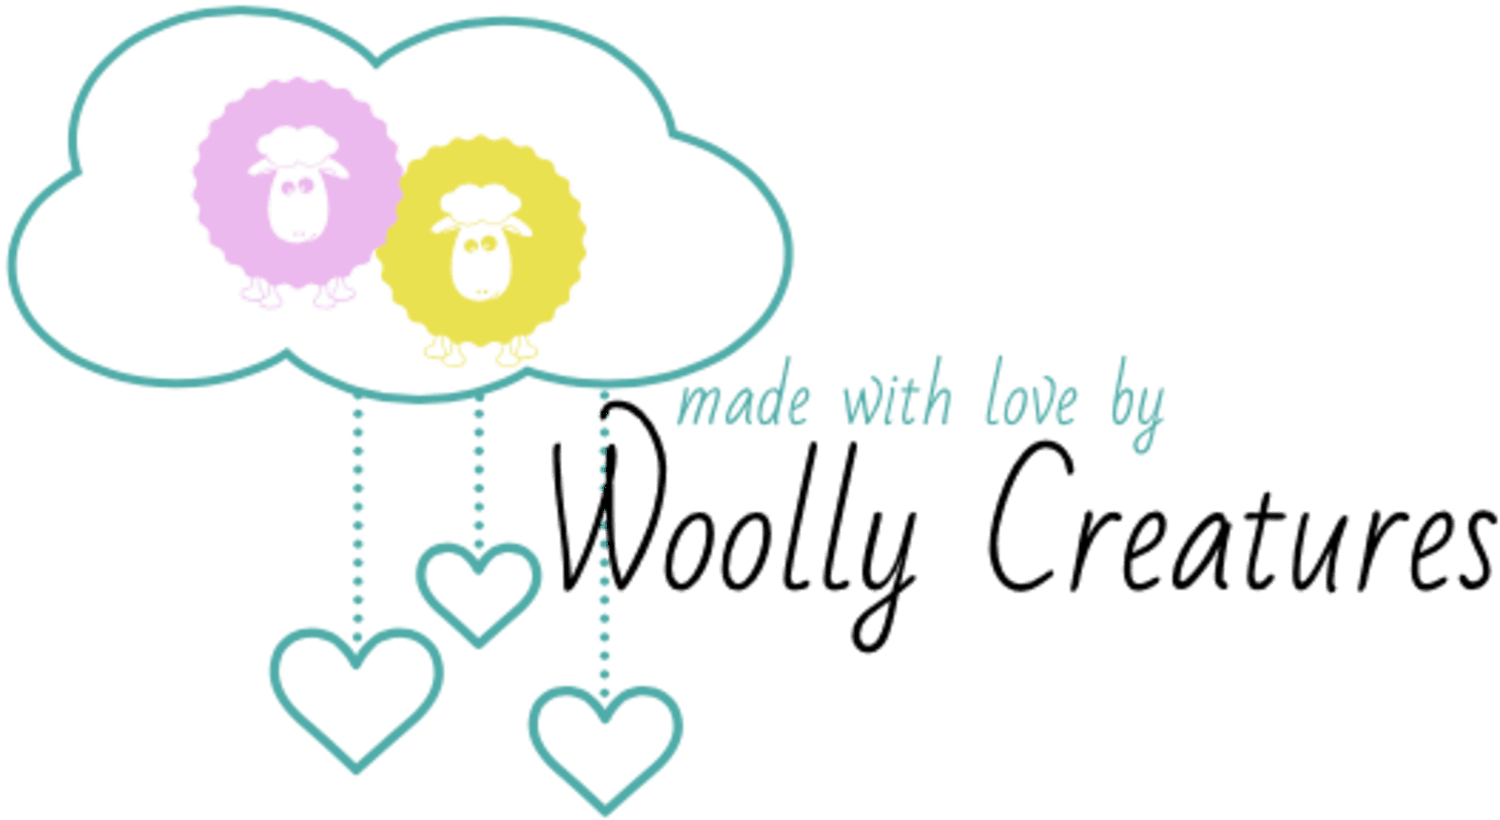 Woolly Creatures